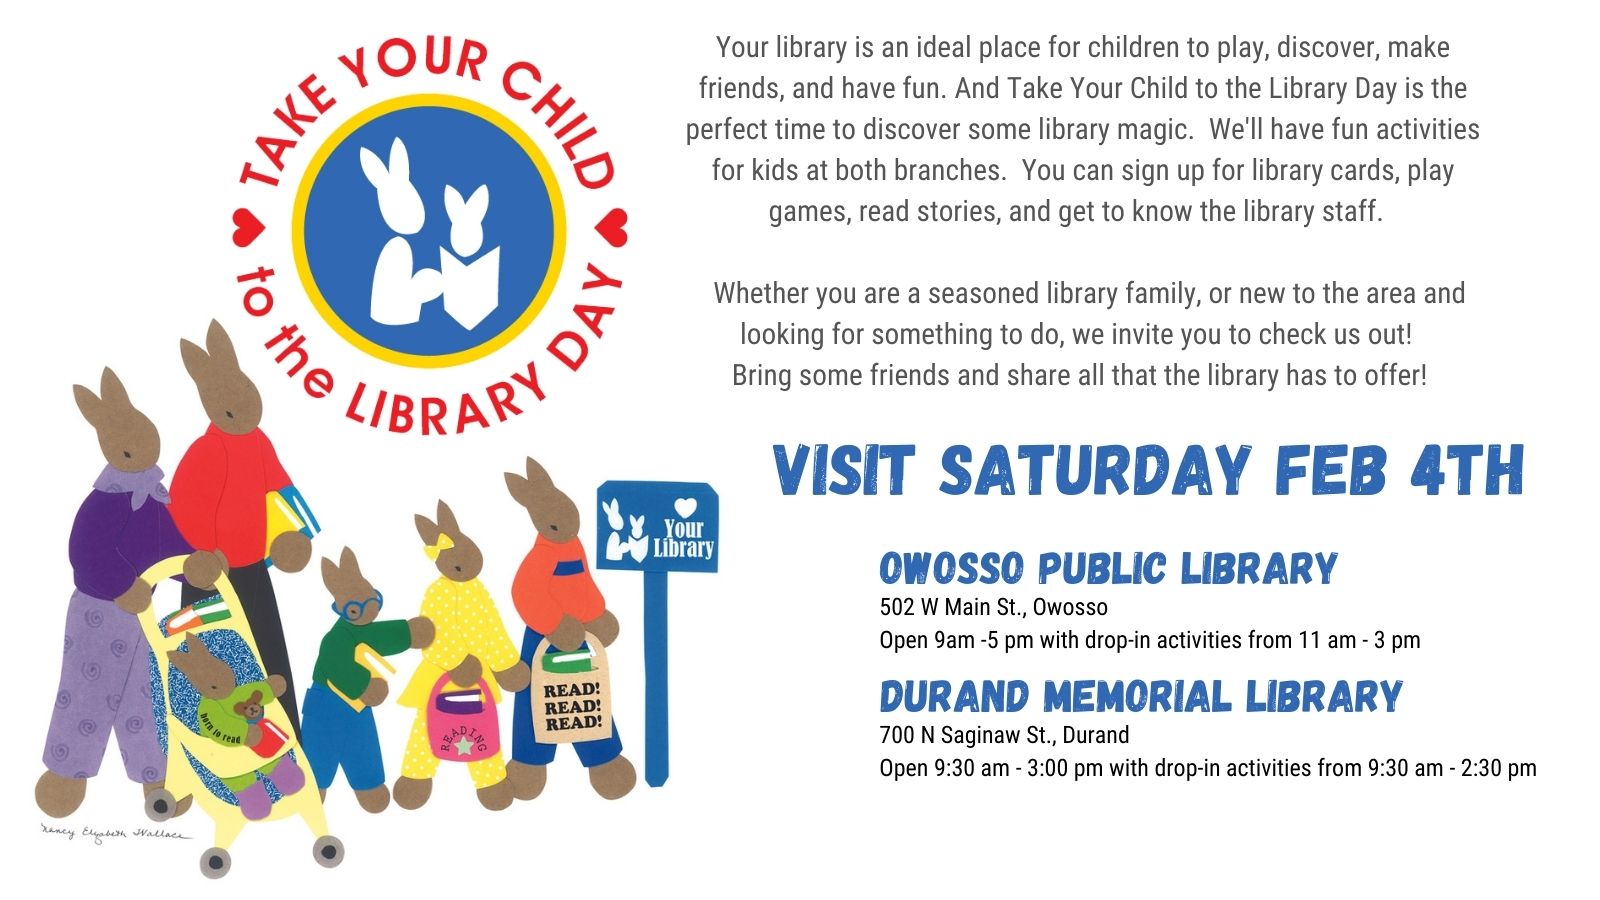 feb 4 is take your child to the library day